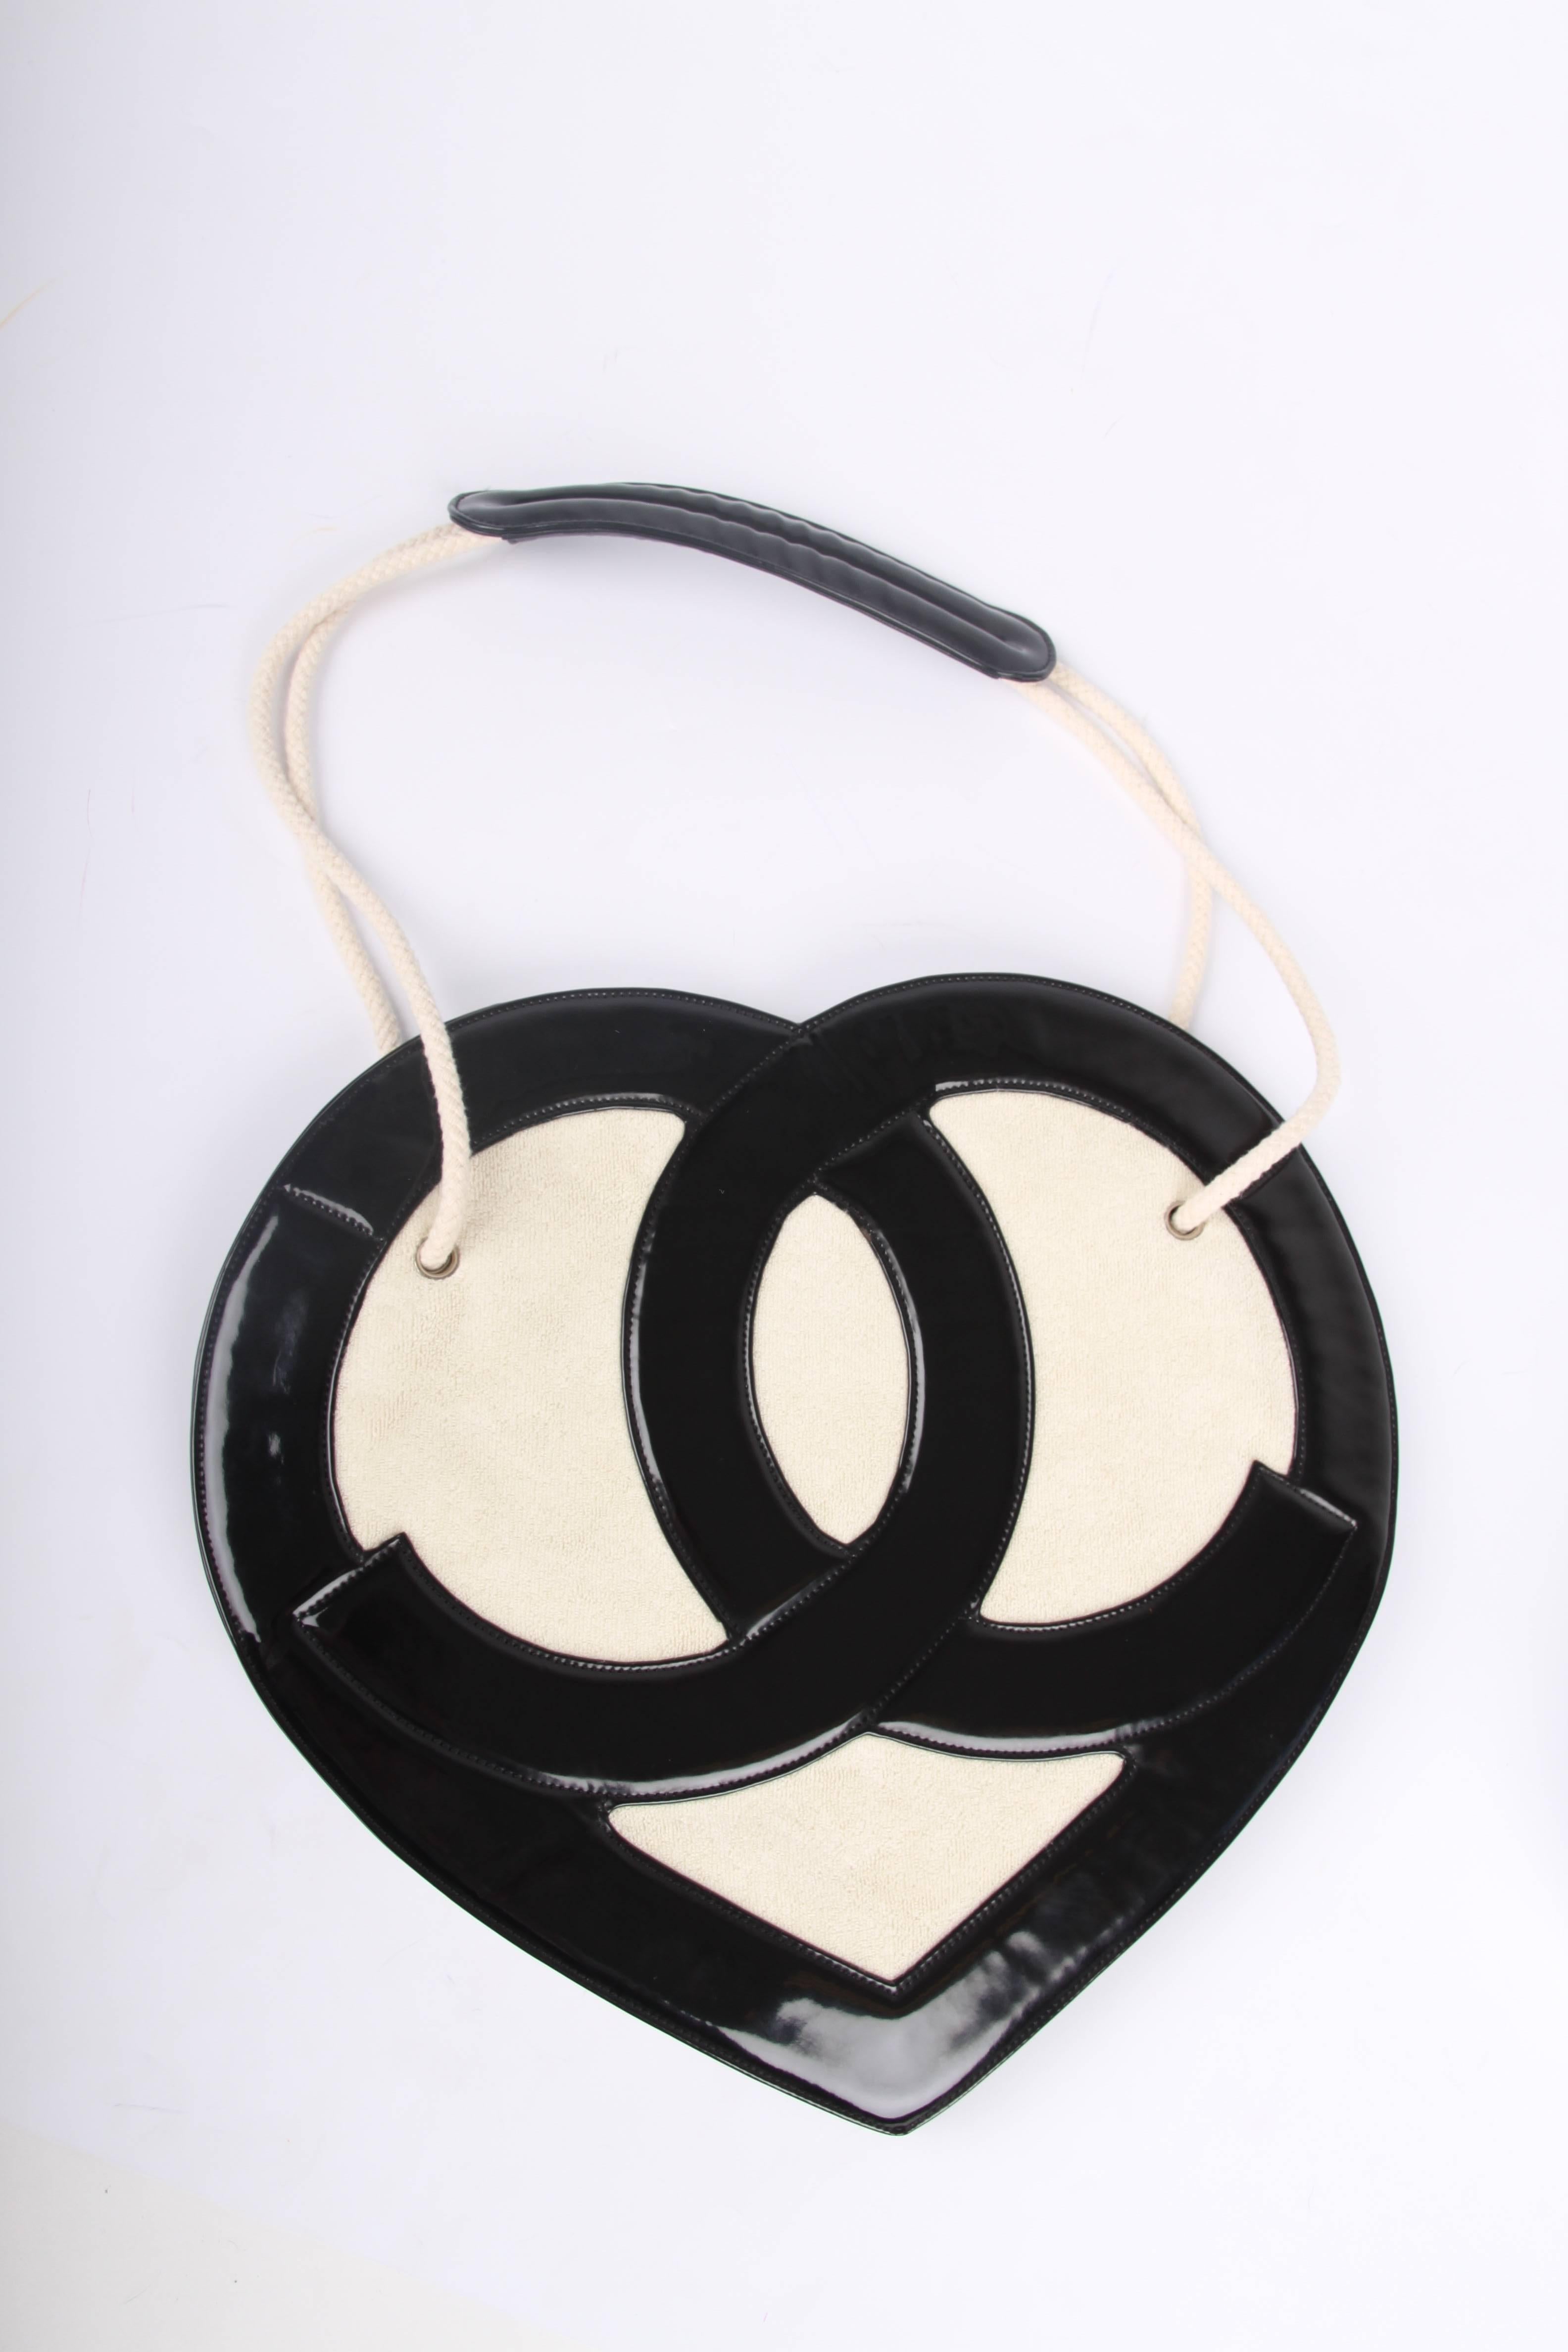 This bag is from the Chanel Cruise Collection of 2009, a true runway piece; the Chanel Heart Shaped Bag!

Made of black patent leather and white terry cloth with a super large CC logo at the front and back in a heart shape. How adorable! The handles